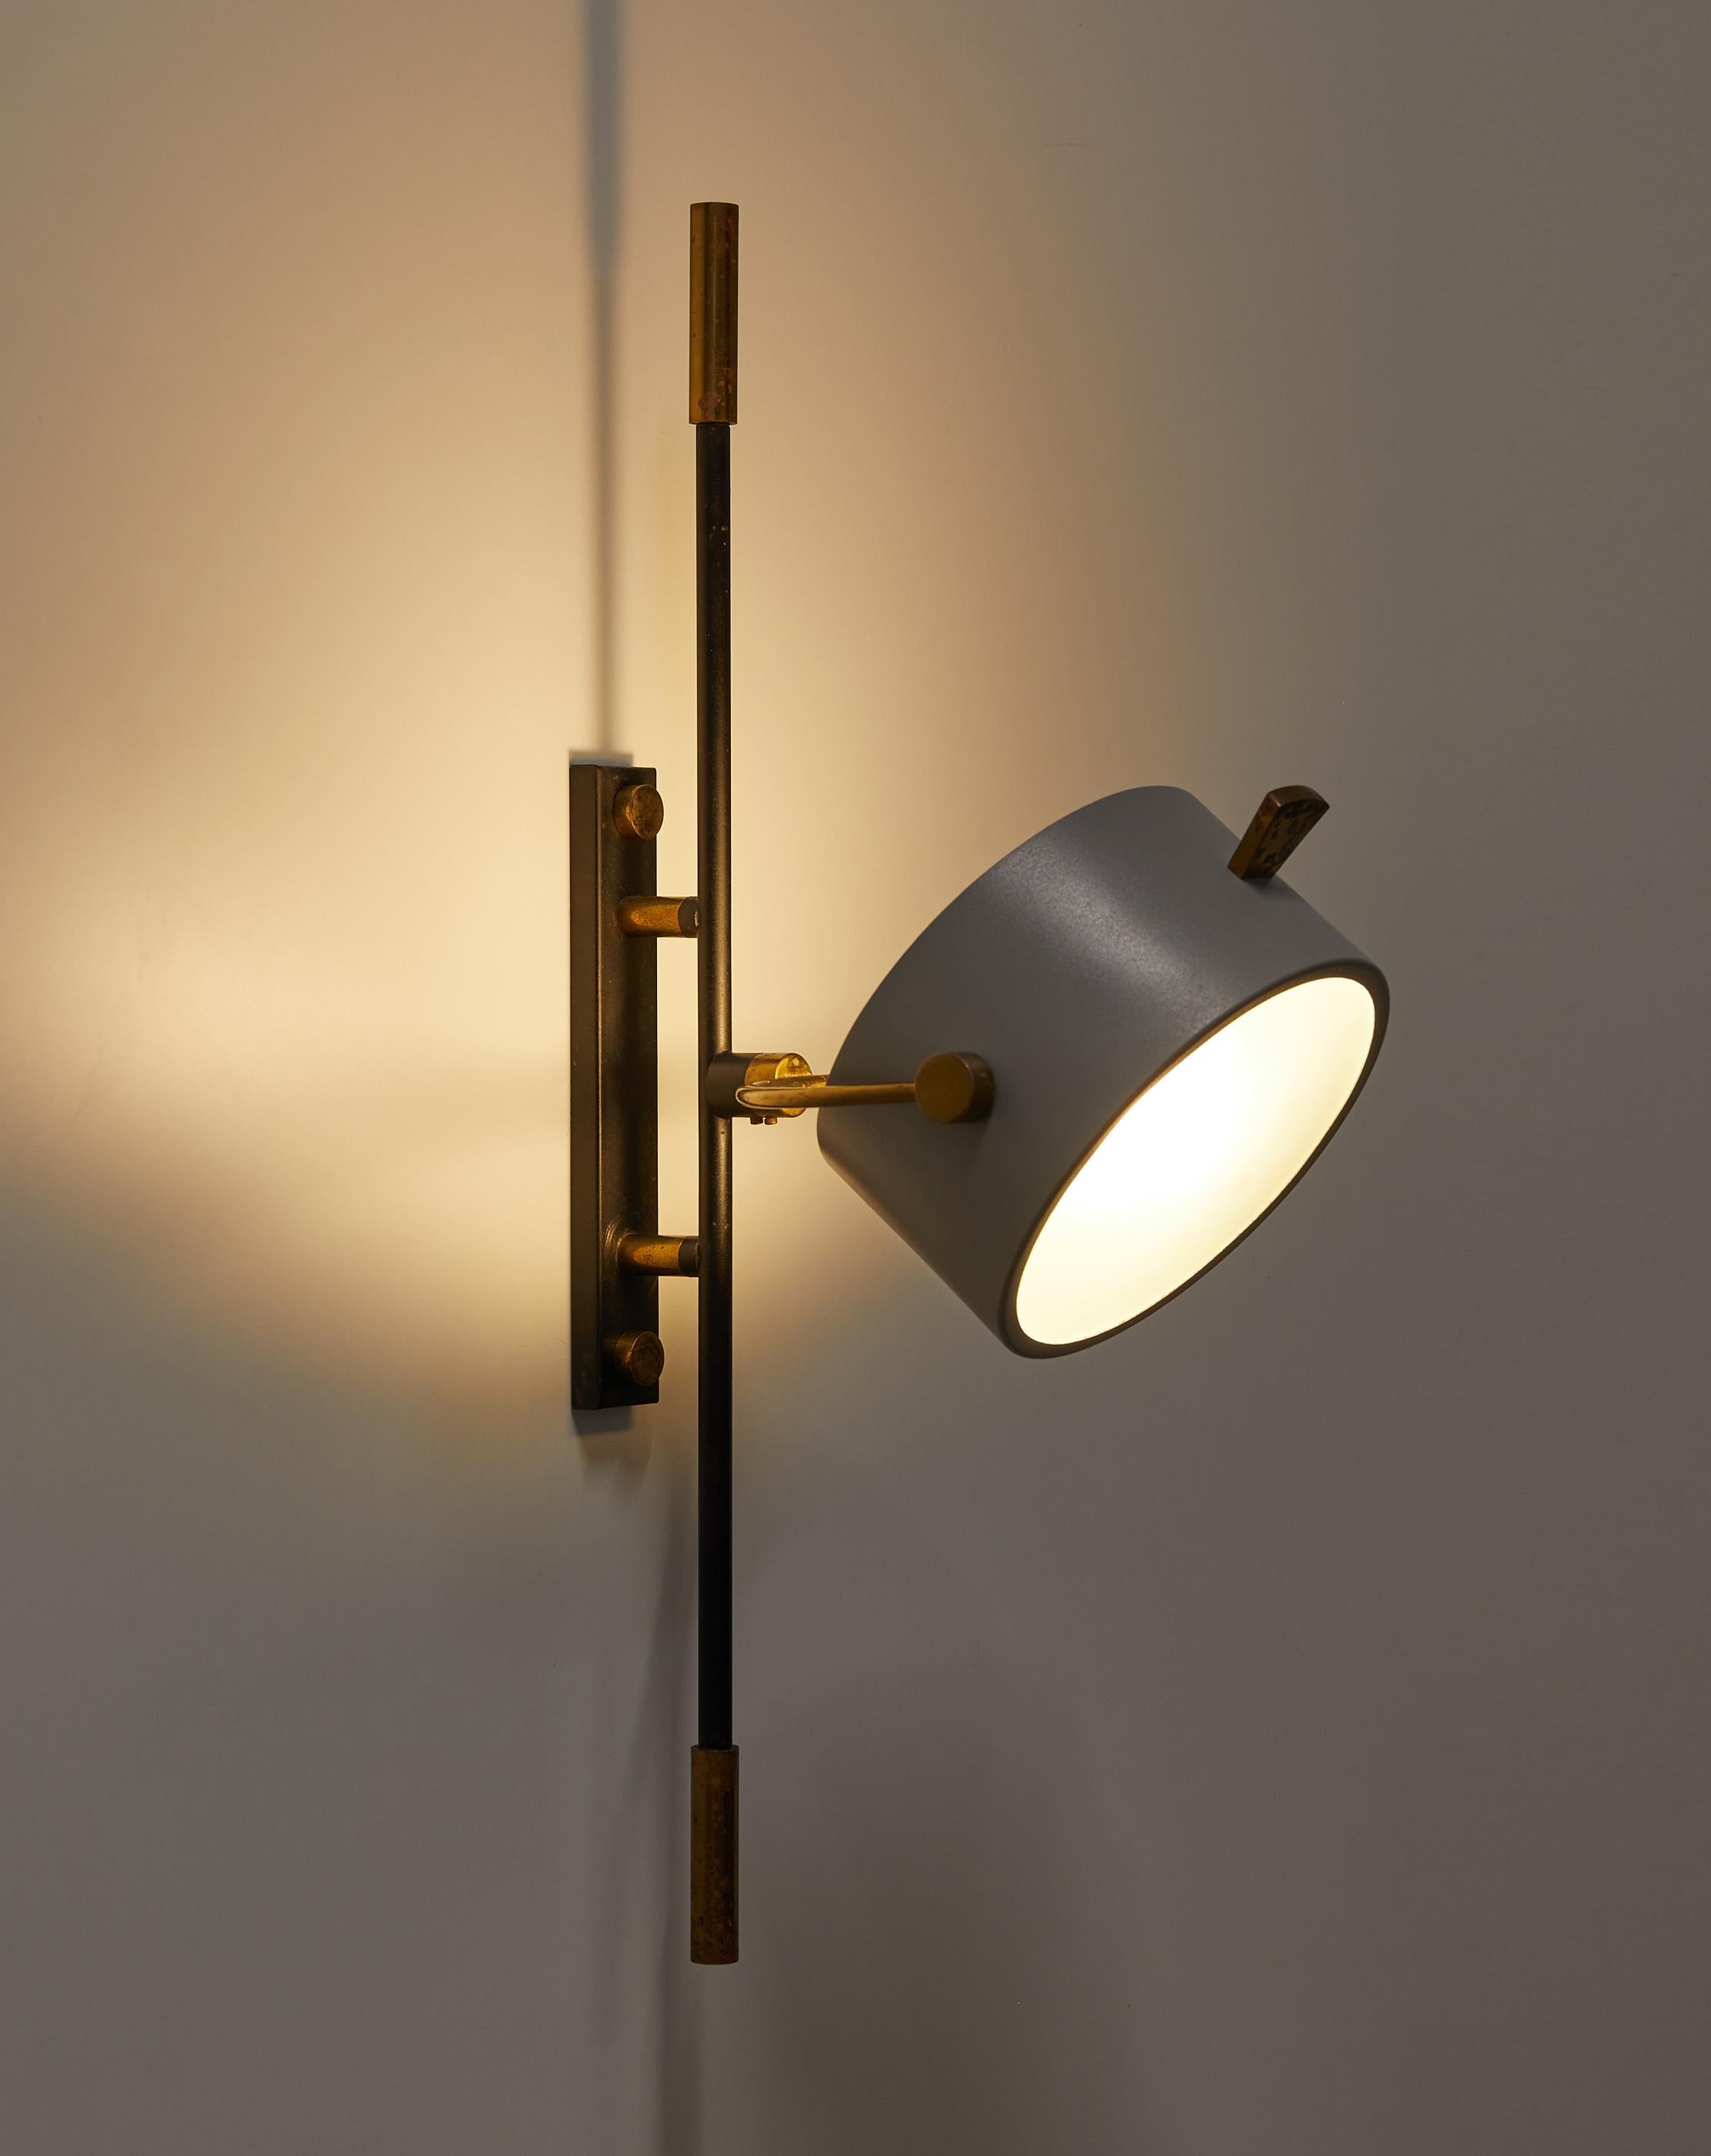 Mid-Century Modern Wall Sconce with Lens Shaped Reflector by Maison Lunel, France, 1950